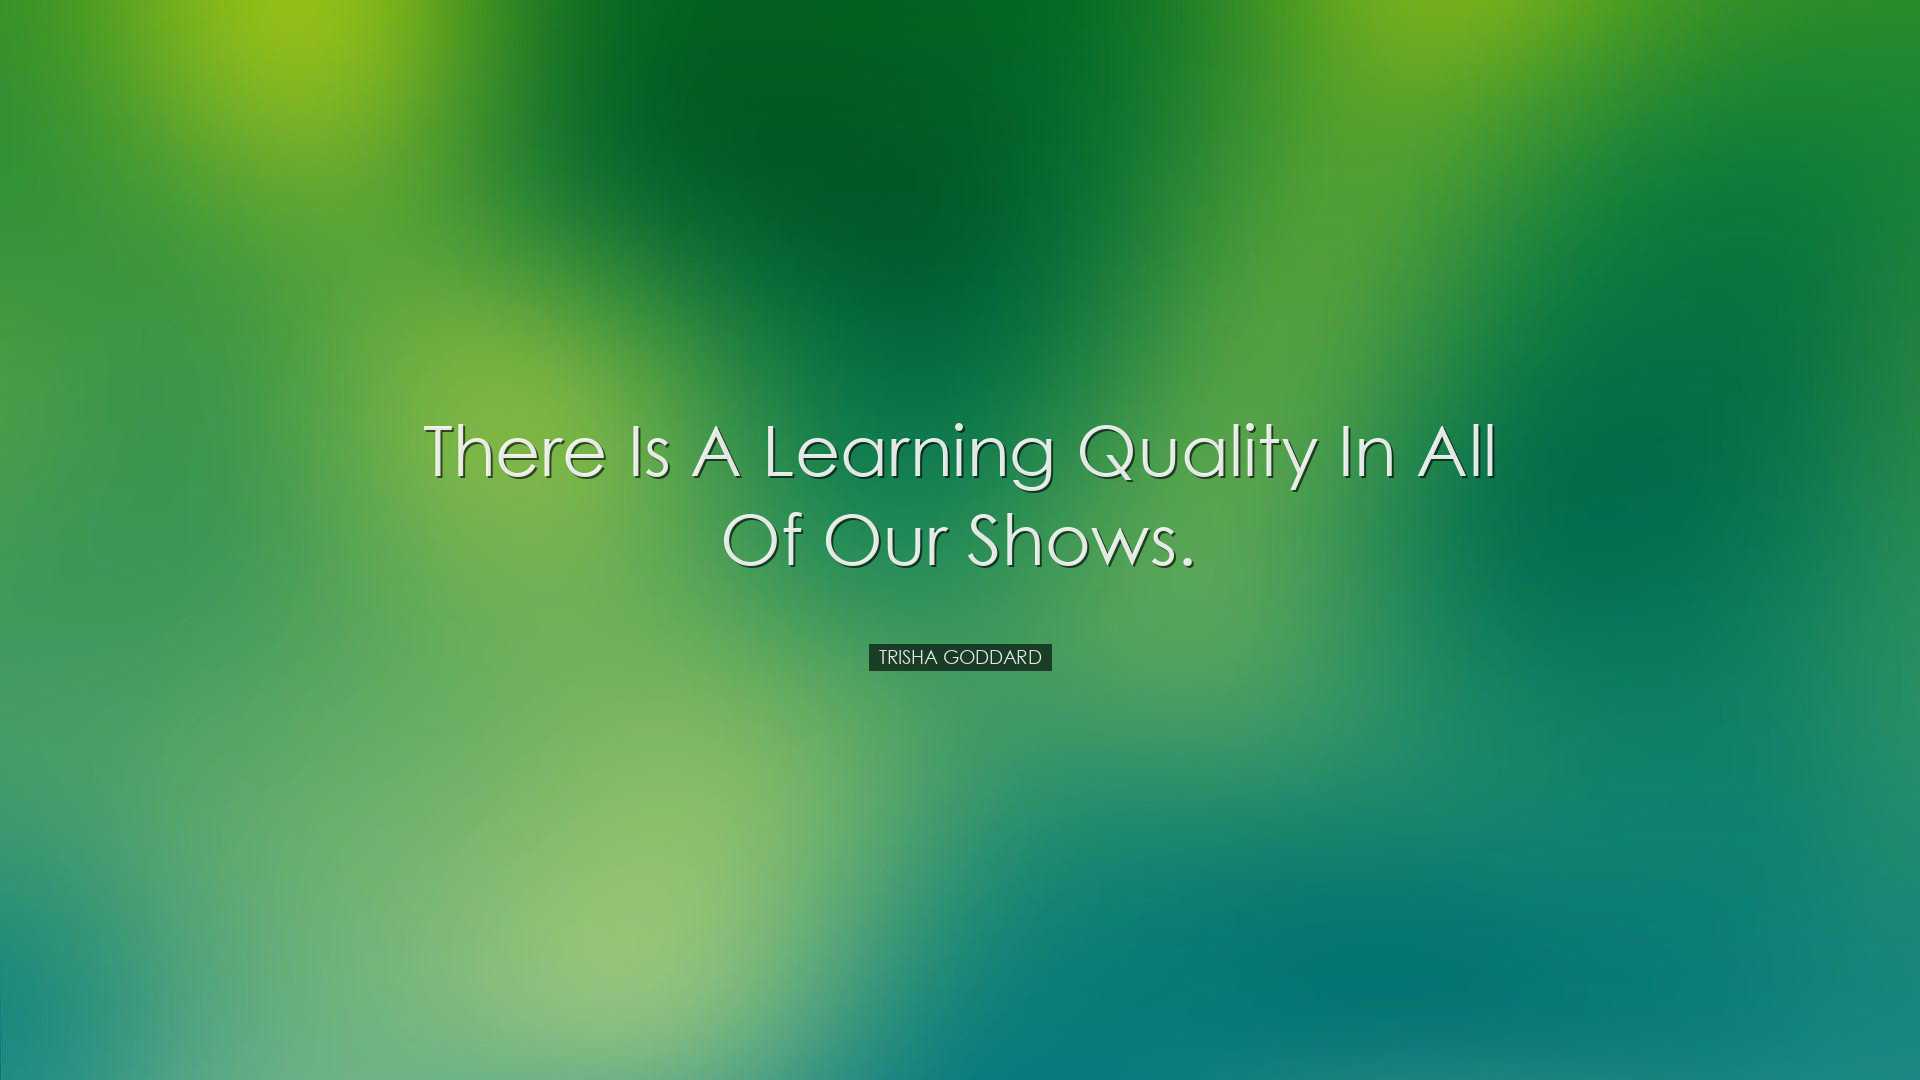 There is a learning quality in all of our shows. - Trisha Goddard